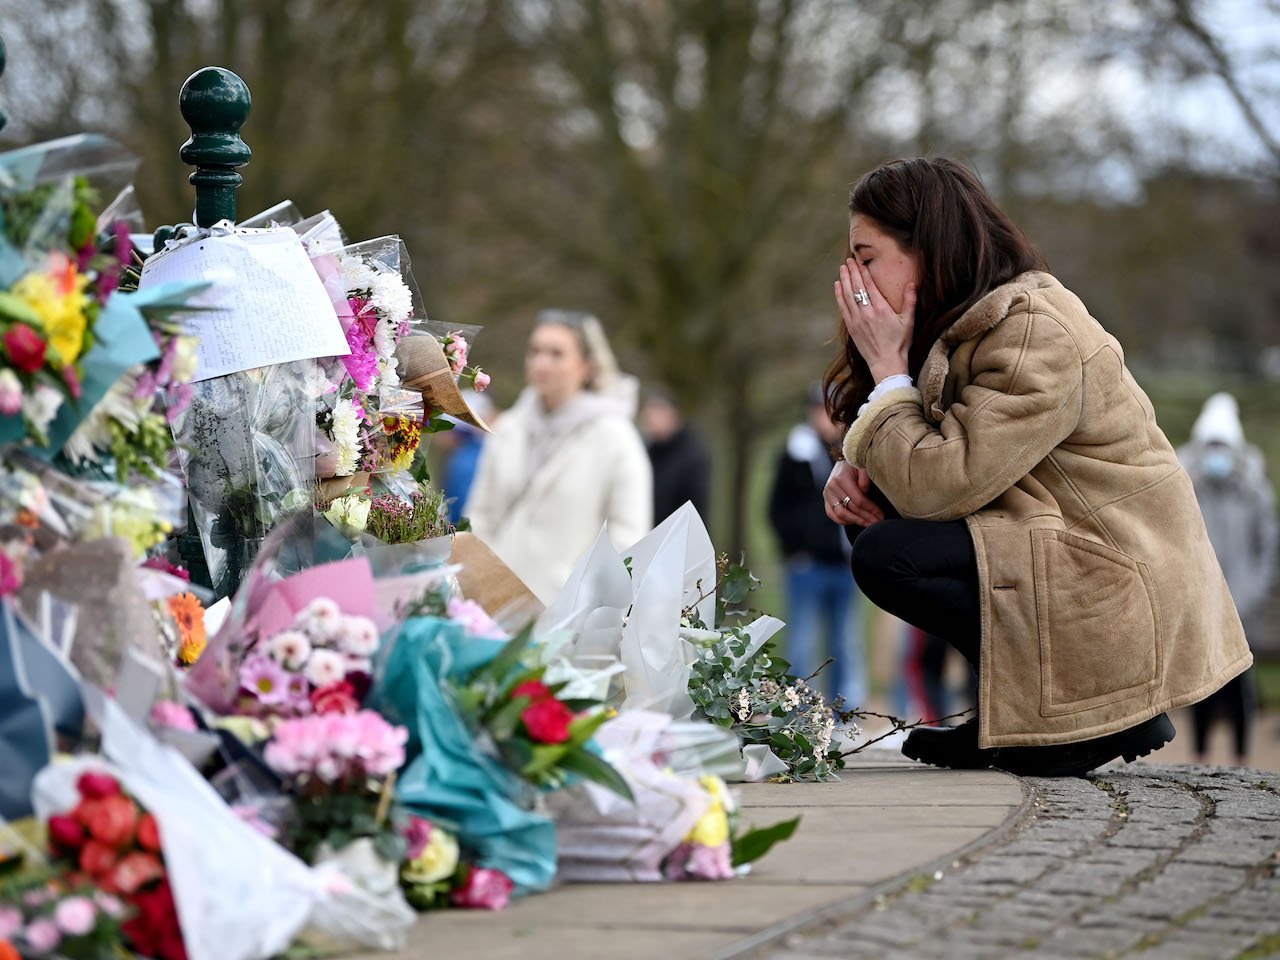 A woman reacts as she lays flowers in tribute to Sarah Everard at the bandstand on Clapham Common on March 13, 2021 in London, United Kingdom. Vigils are being held across the United Kingdom in memory of Sarah Everard. Yesterday, the Police confirmed that the remains of Ms Everard were found in a woodland area in Ashford, a week after she went missing as she walked home from visiting a friend in Clapham. Metropolitan Police Officer Wayne Couzens has been charged with her kidnap and murder.